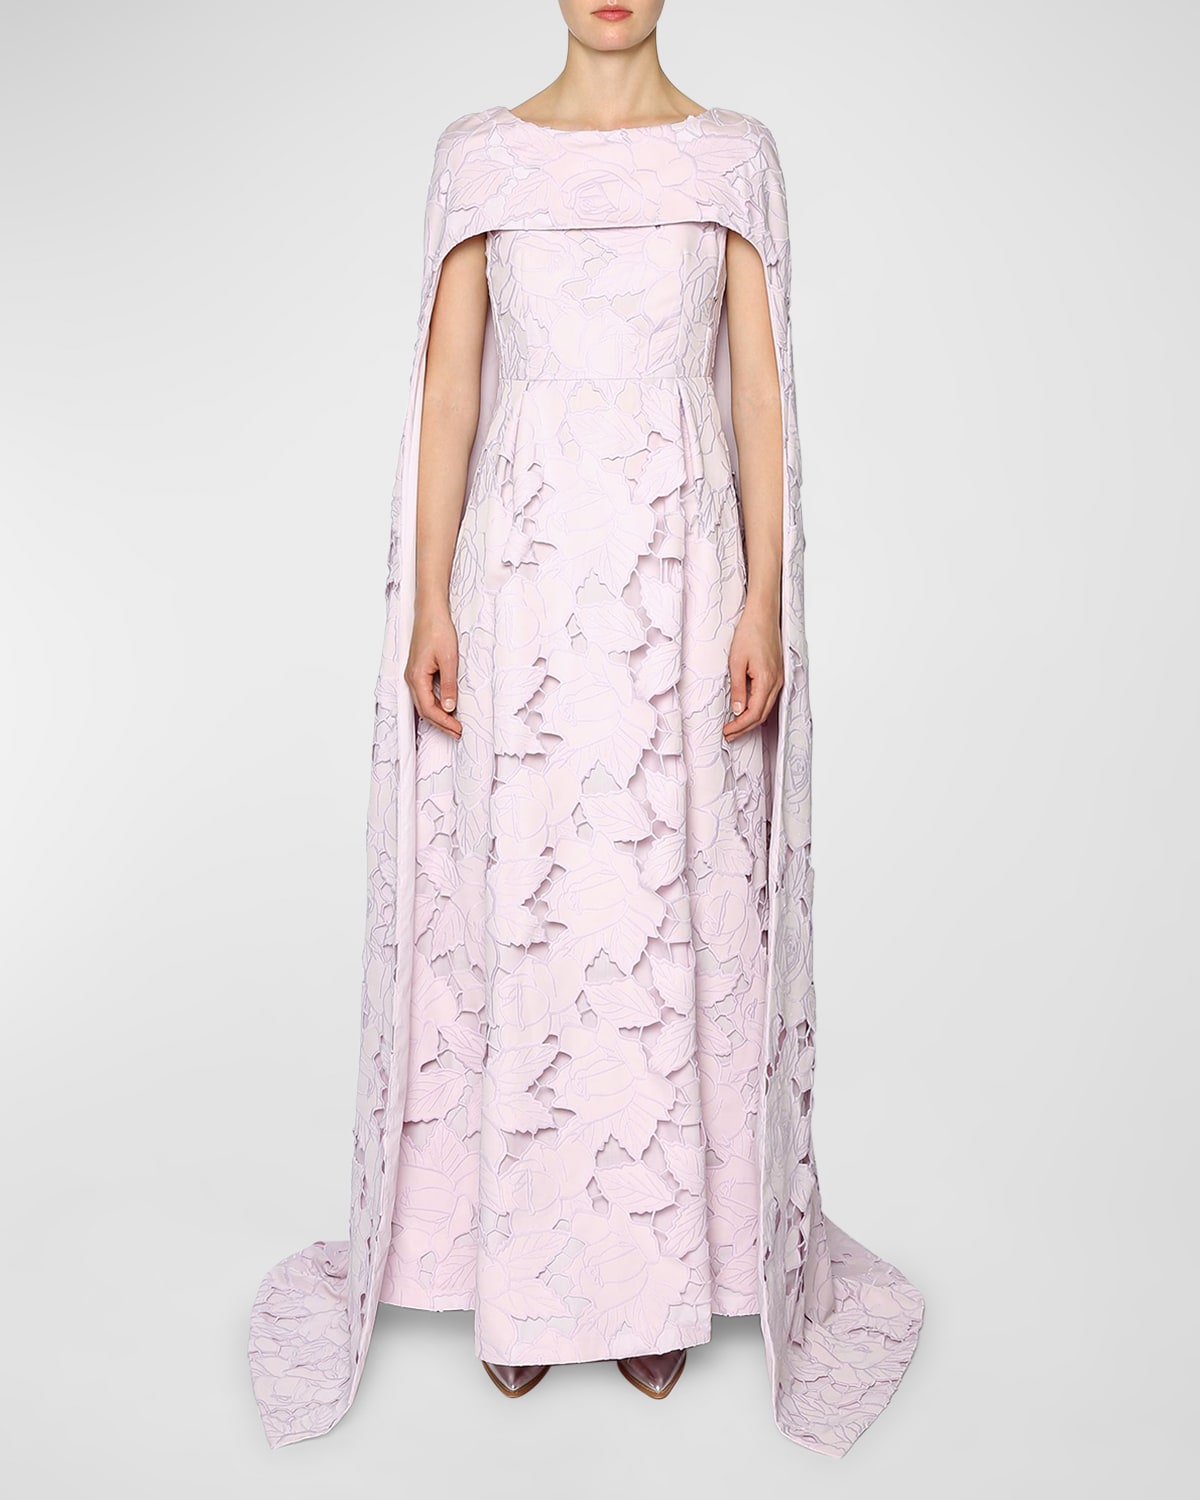 Huishan Zhang Drew Floral Embroidered Lace Cape Gown In Lavendar Ice